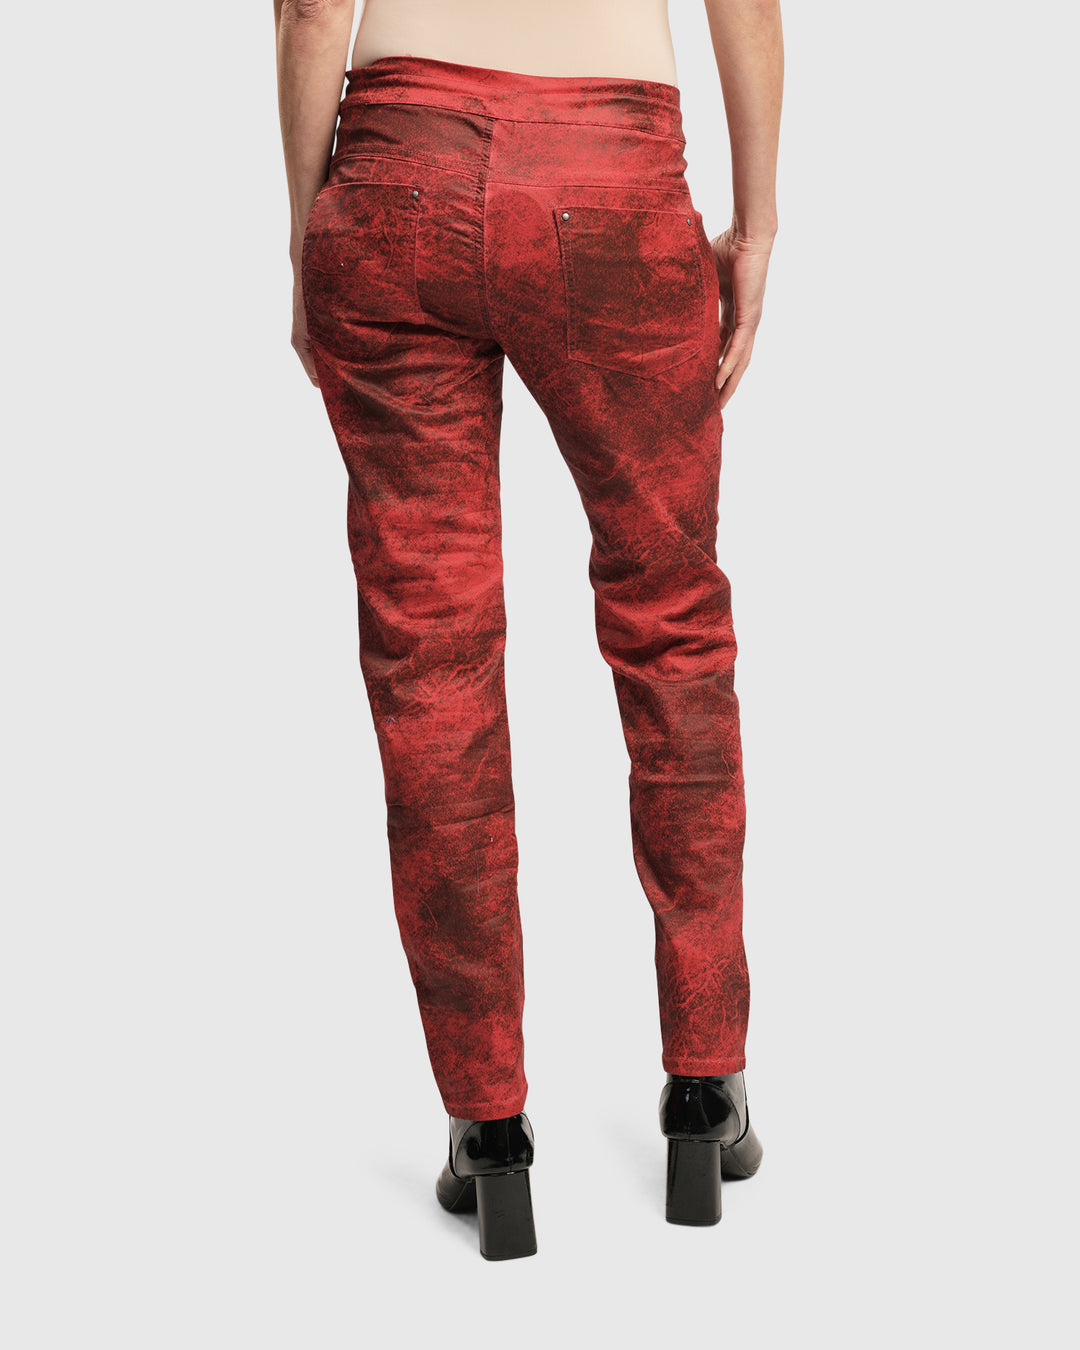 Iconic Jeans Desires, Red